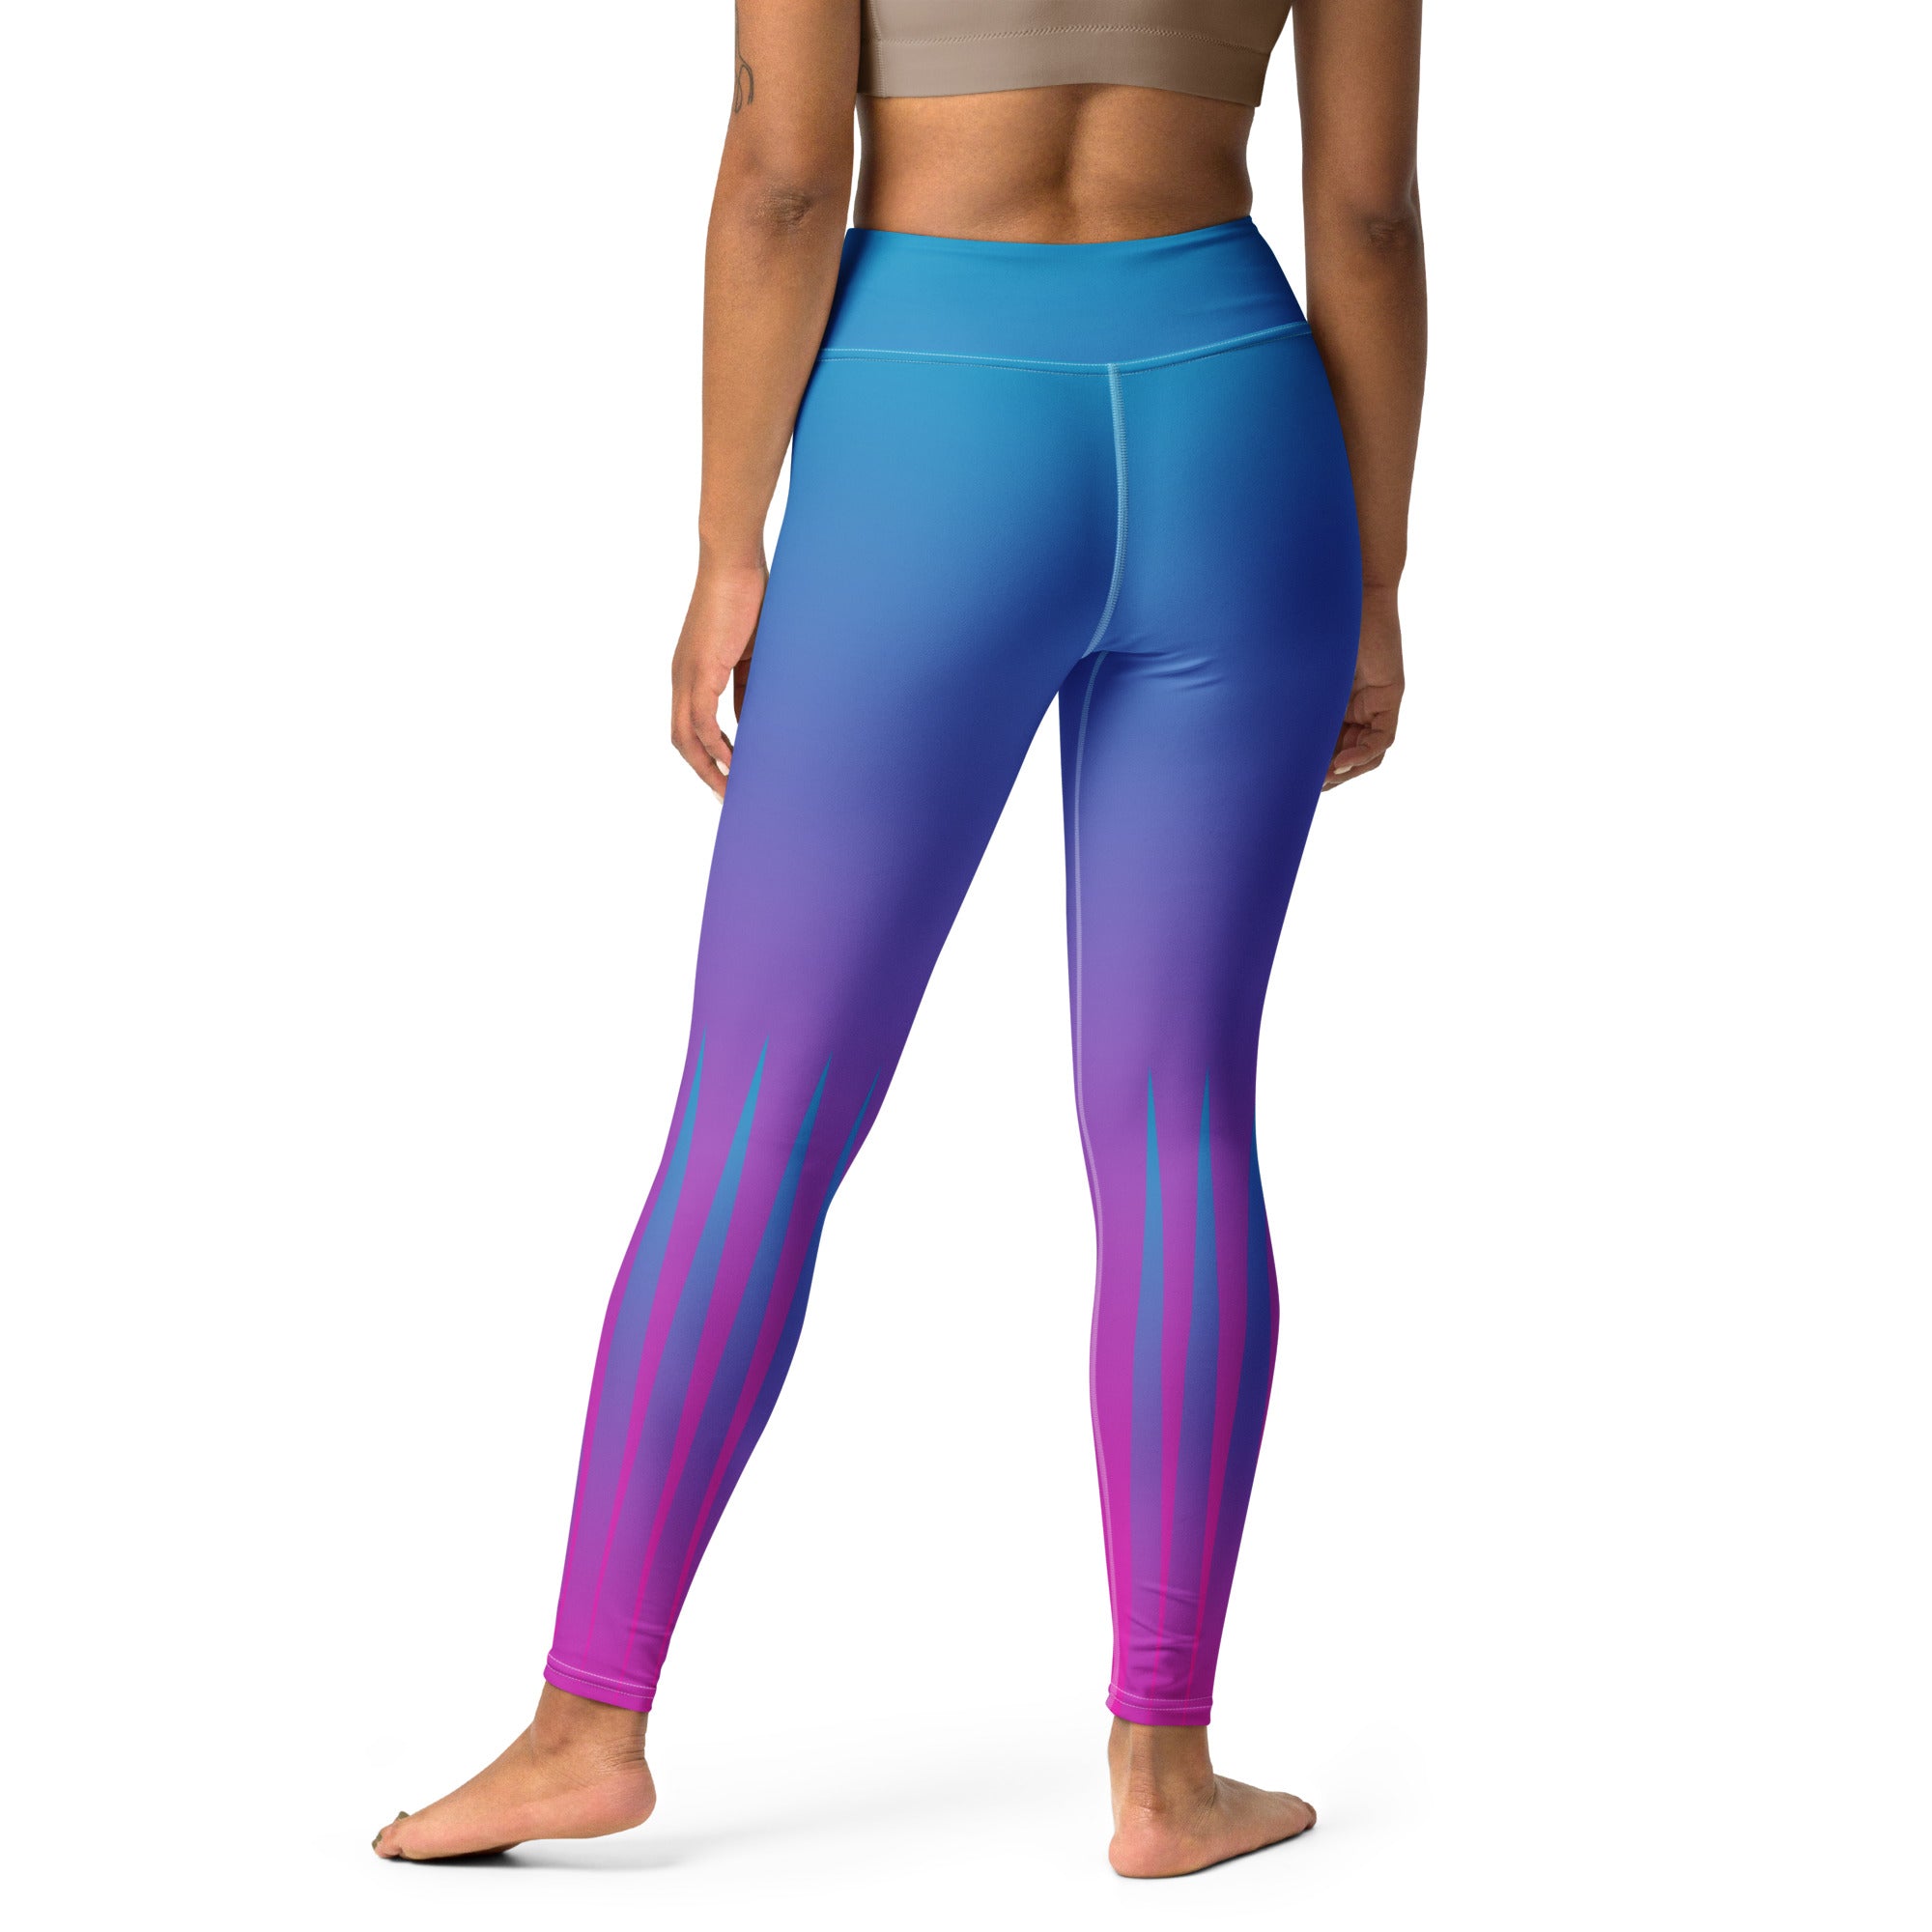 Bring the universe to your yoga session with leggings inspired by the beauty of the celestial sky.